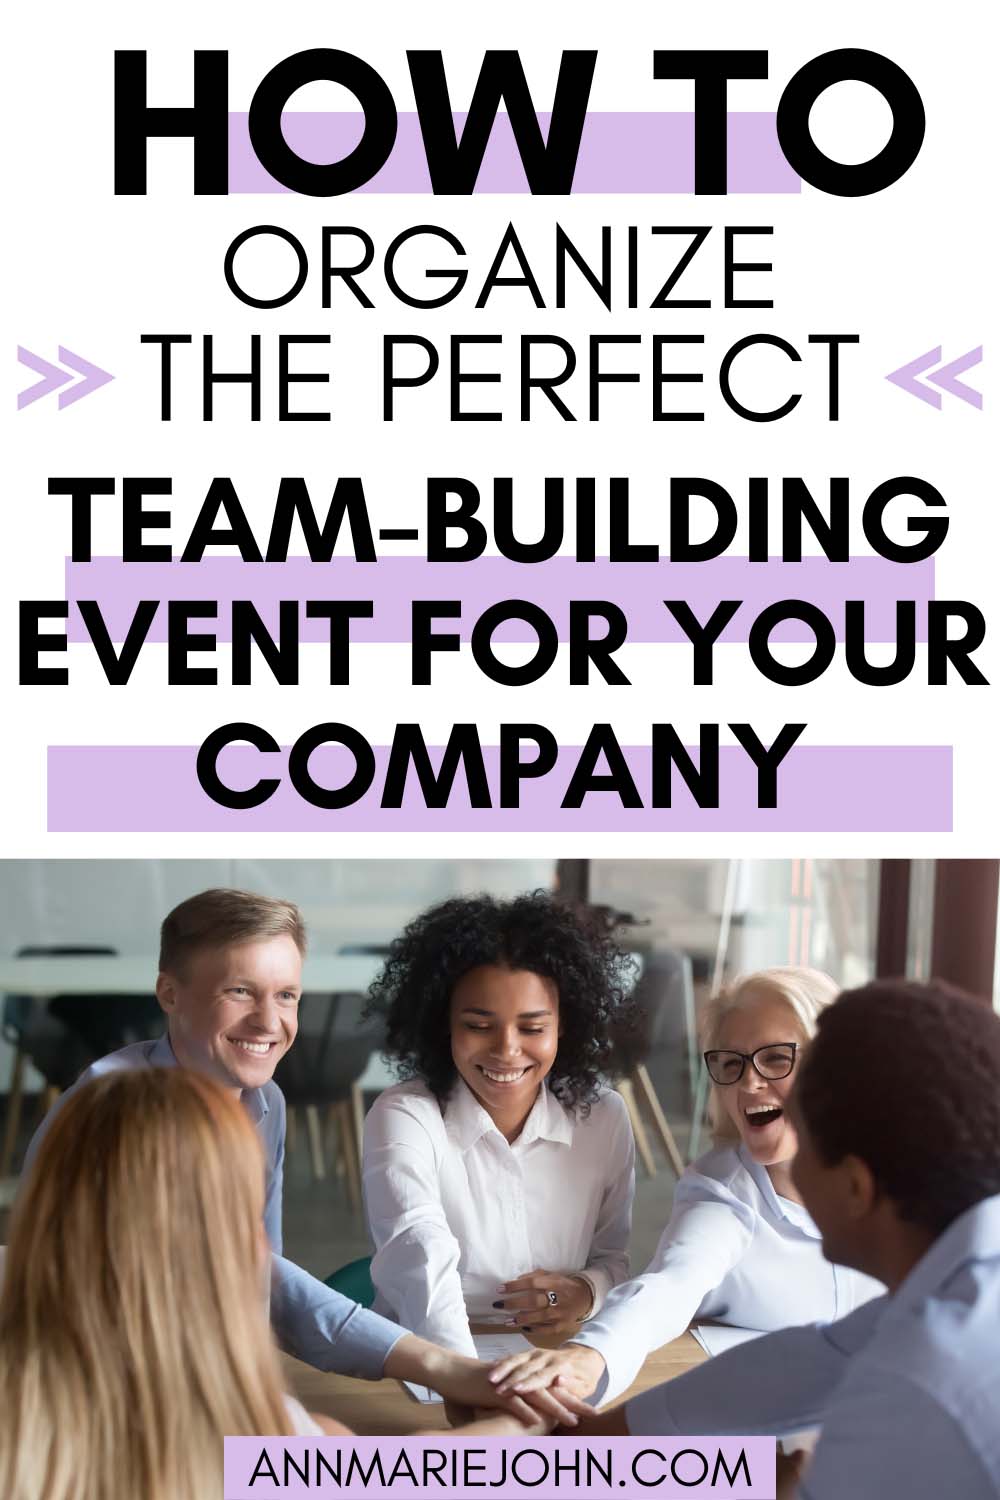 How to Organize the Perfect Team-Building Event for Your Company